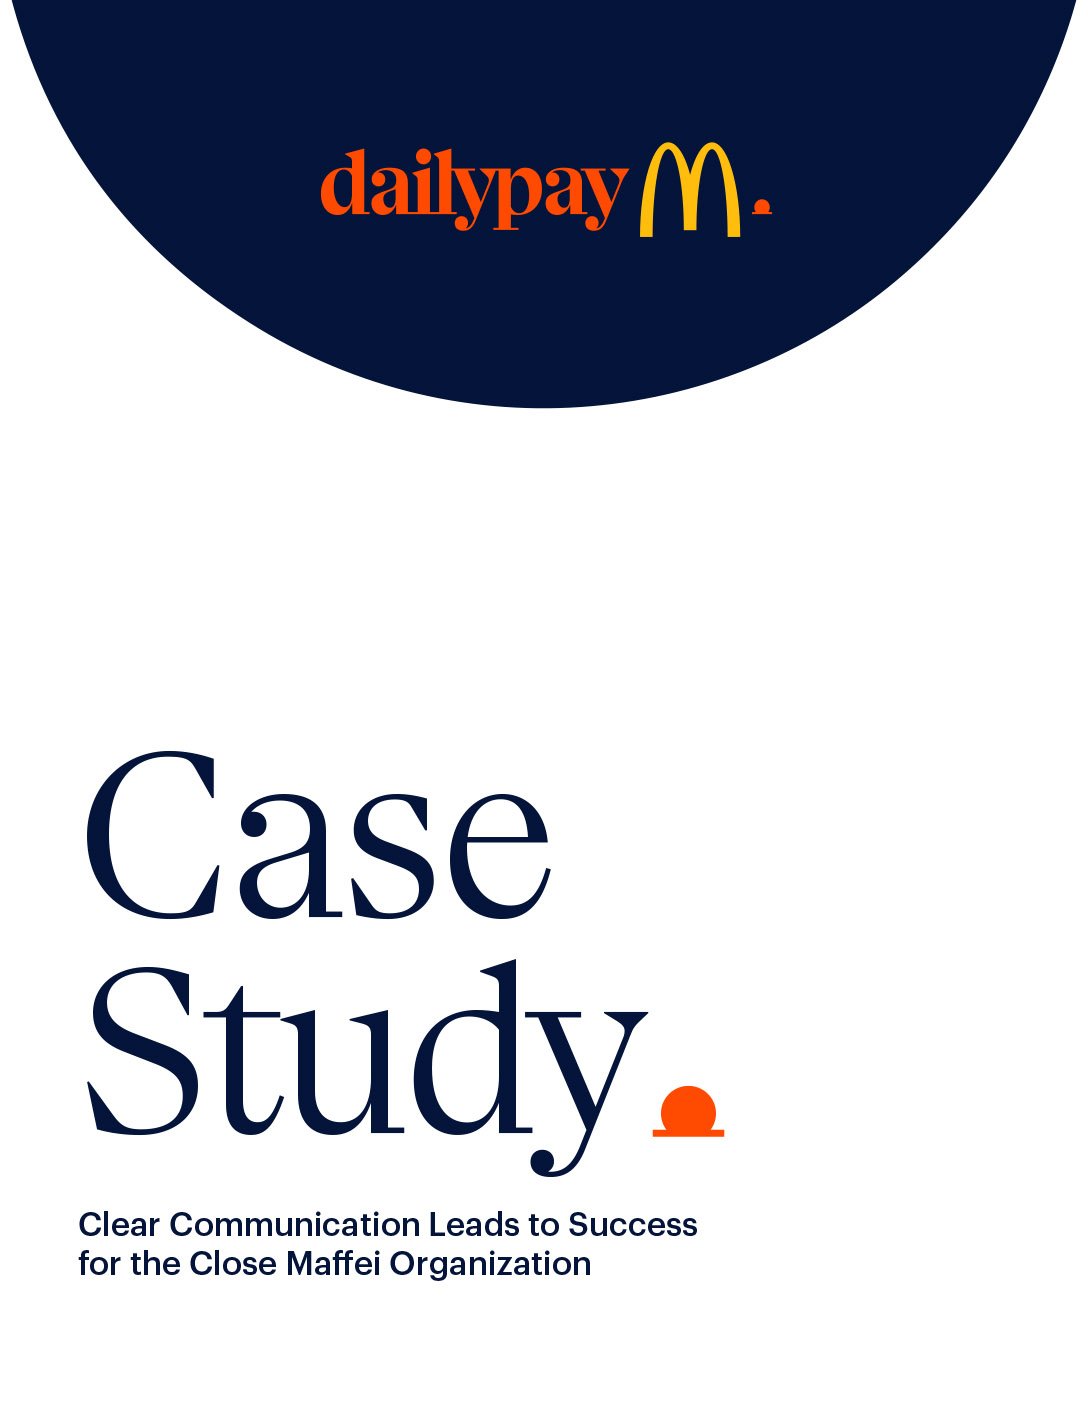 Cover of a document titled "Case Study: Clear Communication Leads to Success for the Close Maffei Organization" with the dailypay logo at the top.